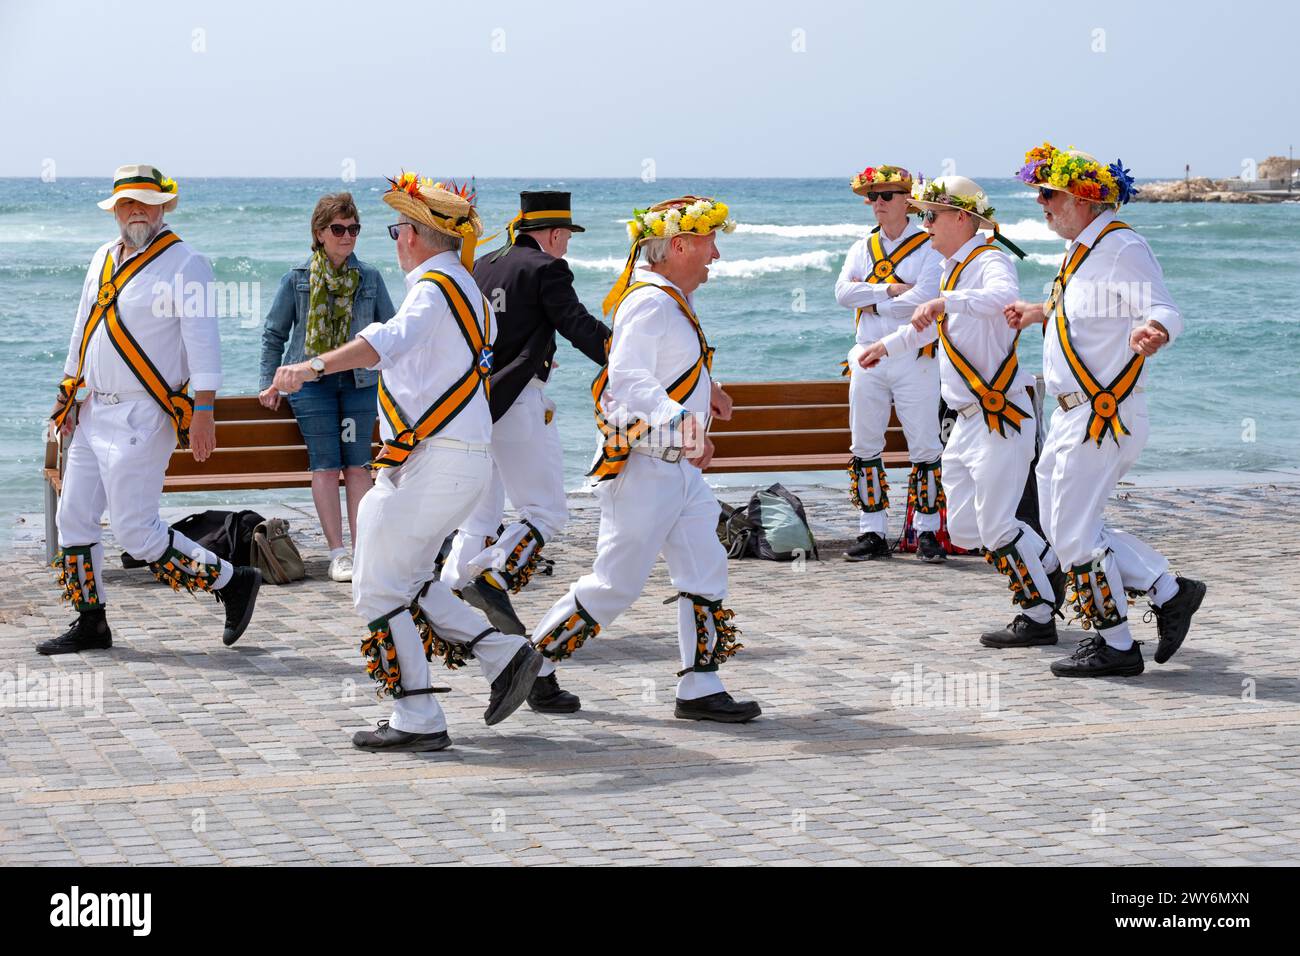 A group of touring British morris men or dancers dancing in the Old Harbour area of Paphos, Cyprus. the group are dressed in white with straw hats Stock Photo